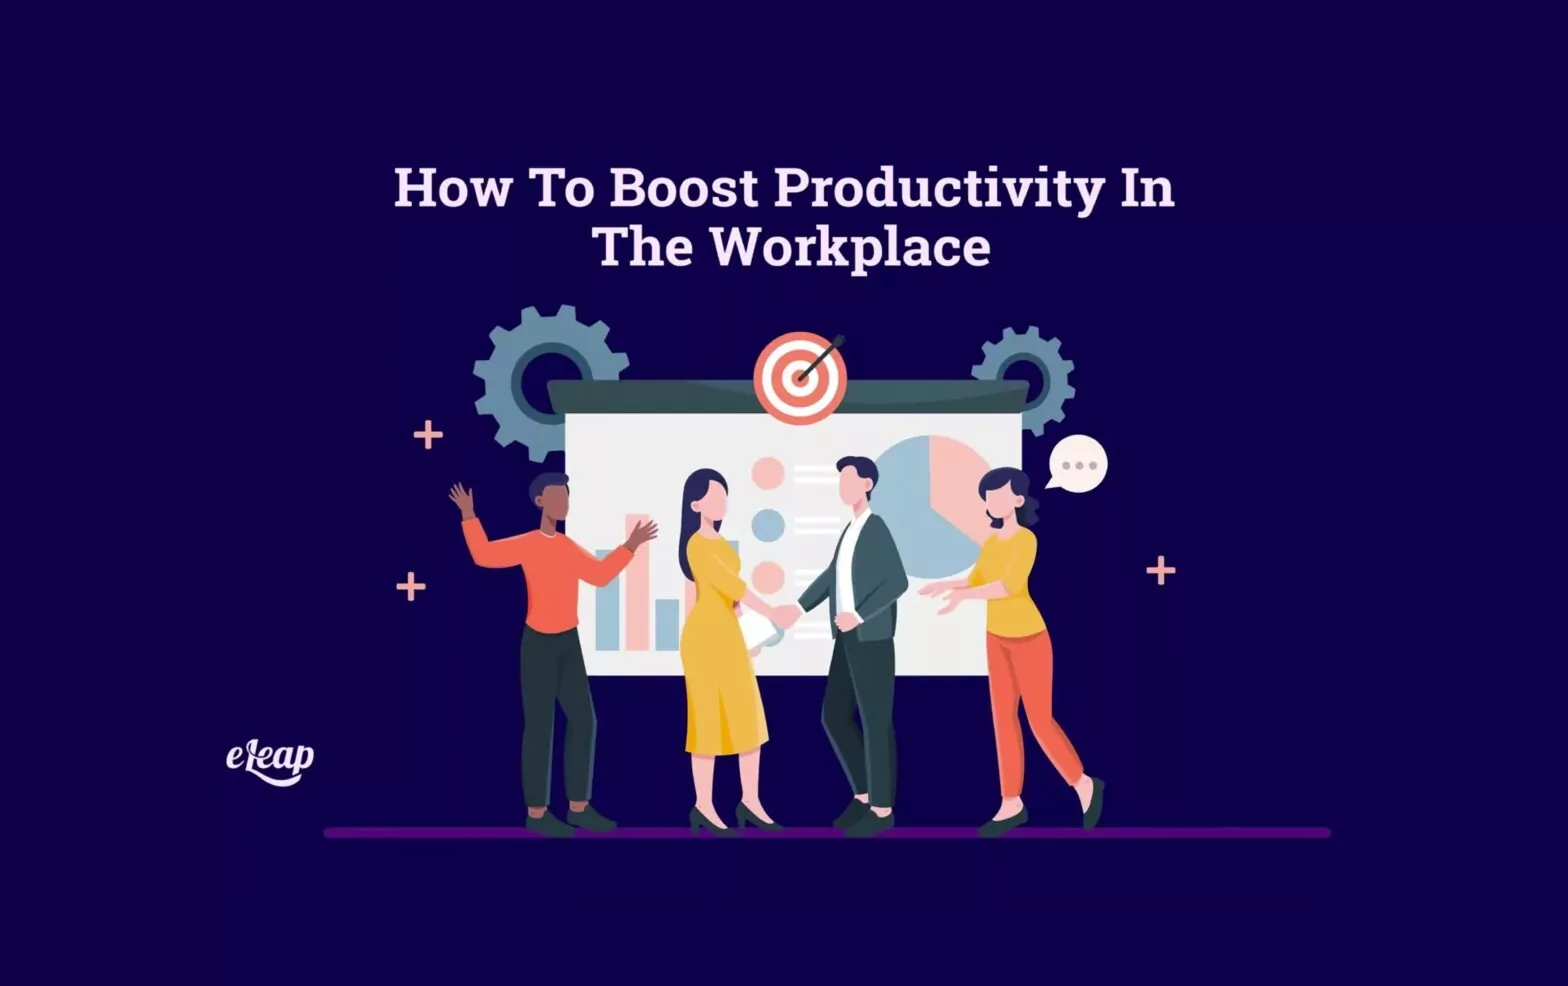 How to Boost Productivity in The Workplace